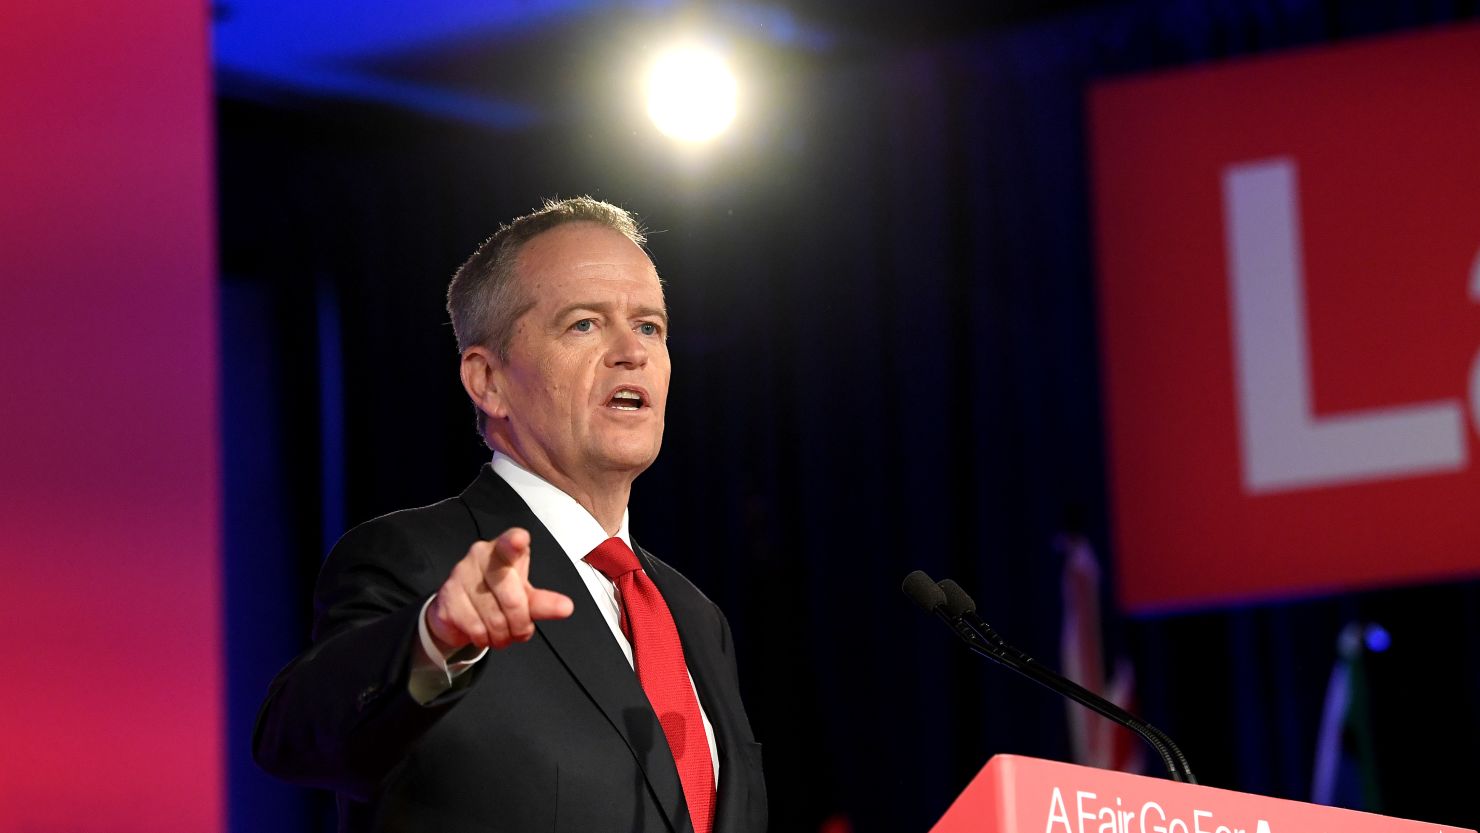 Labor Opposition leader Bill Shorten speaks during the Labor Campaign Launch on May 05, 2019 in Brisbane, Australia. 